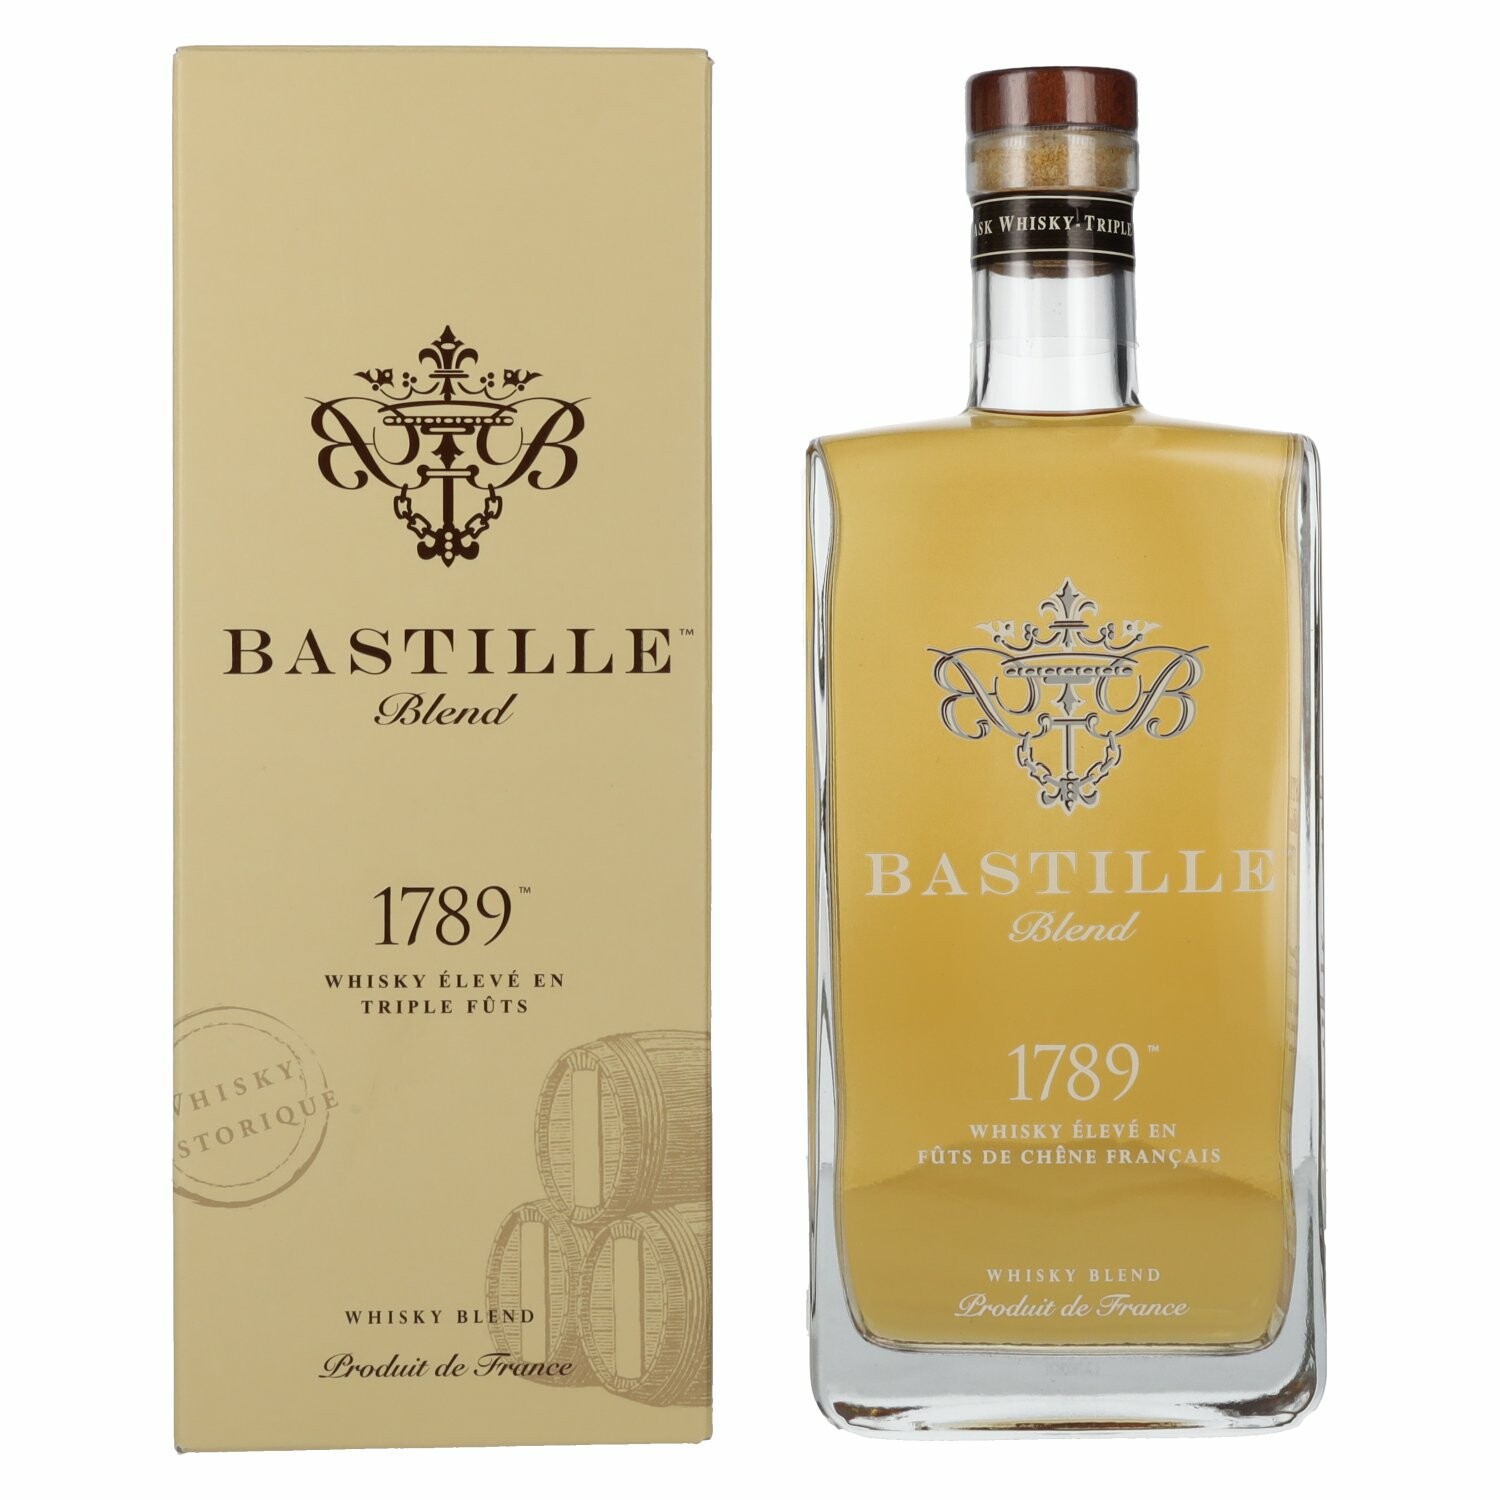 Bastille 1789 Hand-Crafted Blended Whisky 40% Vol. 0,7l in Giftbox